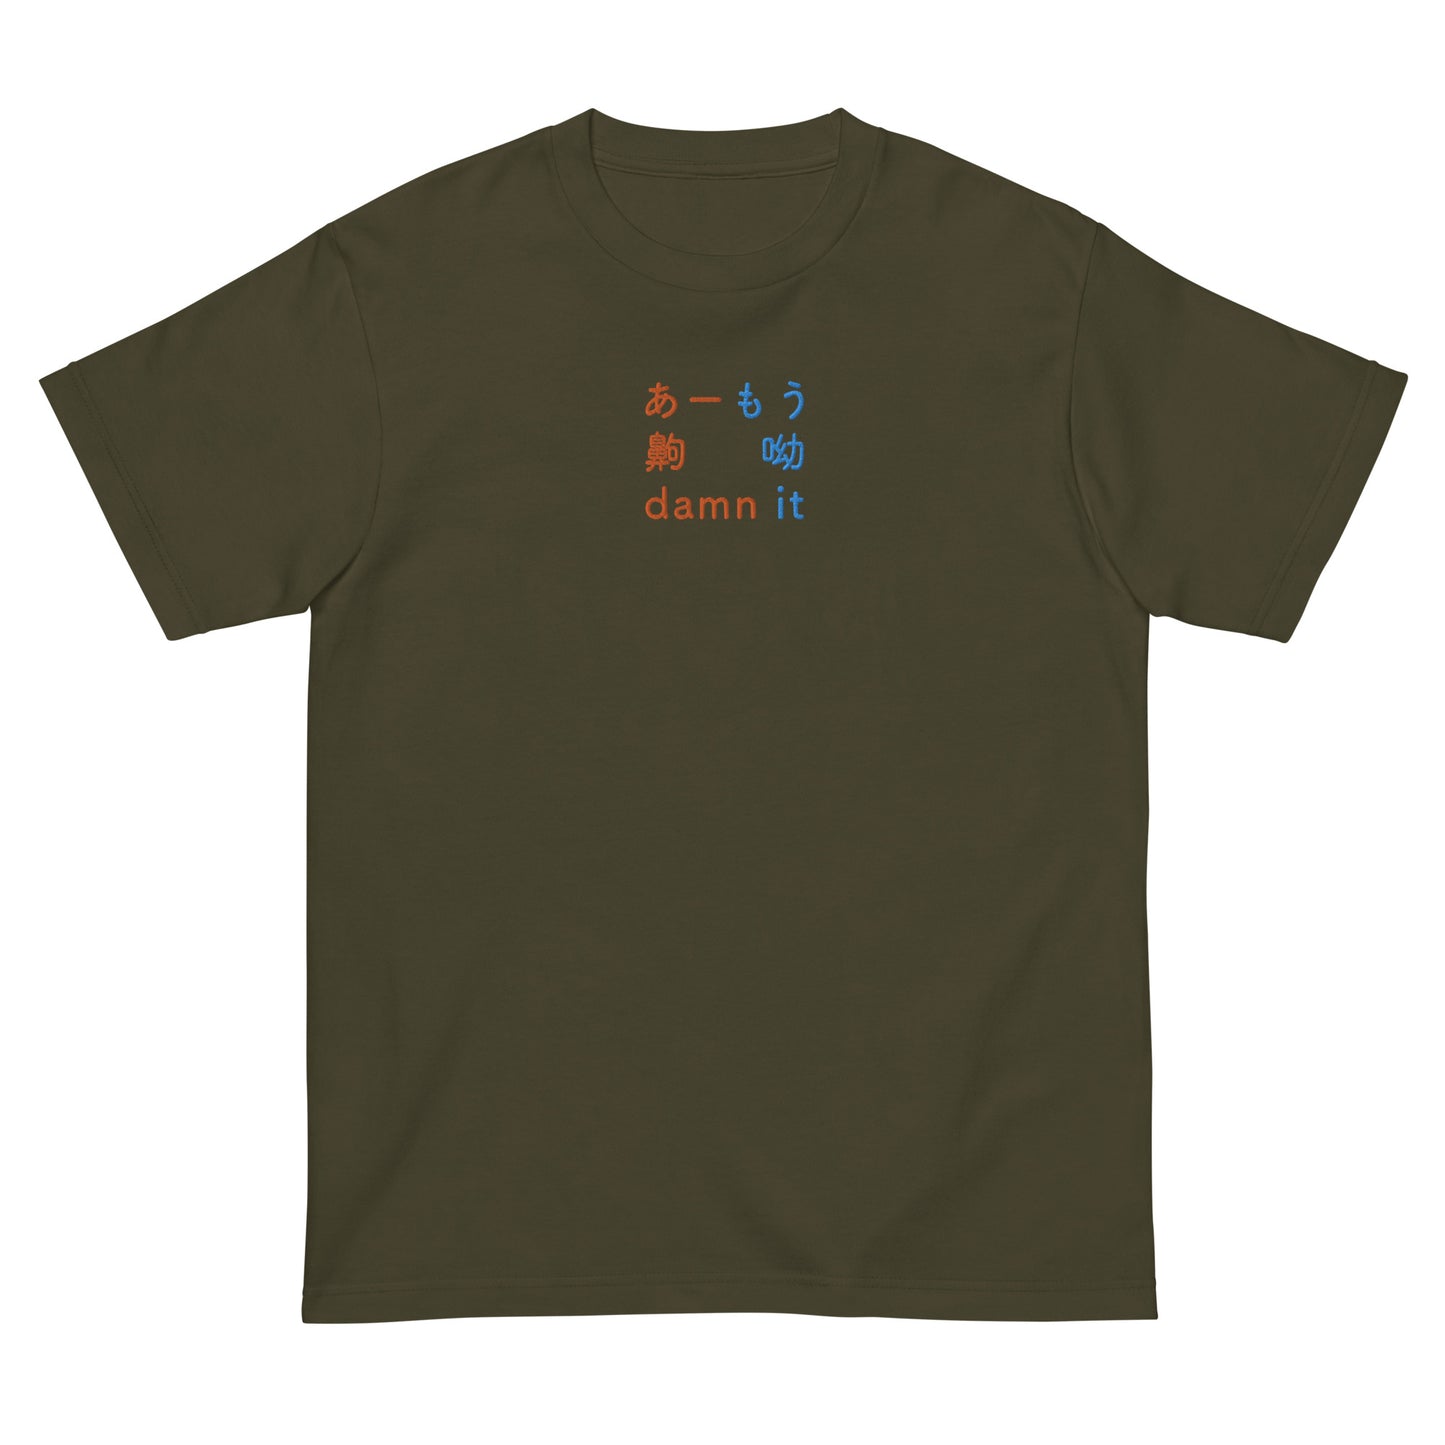 Green High Quality Tee - Front Design with an Orange,Blue Embroidery "Damn it" in Japanese,Chinese and English